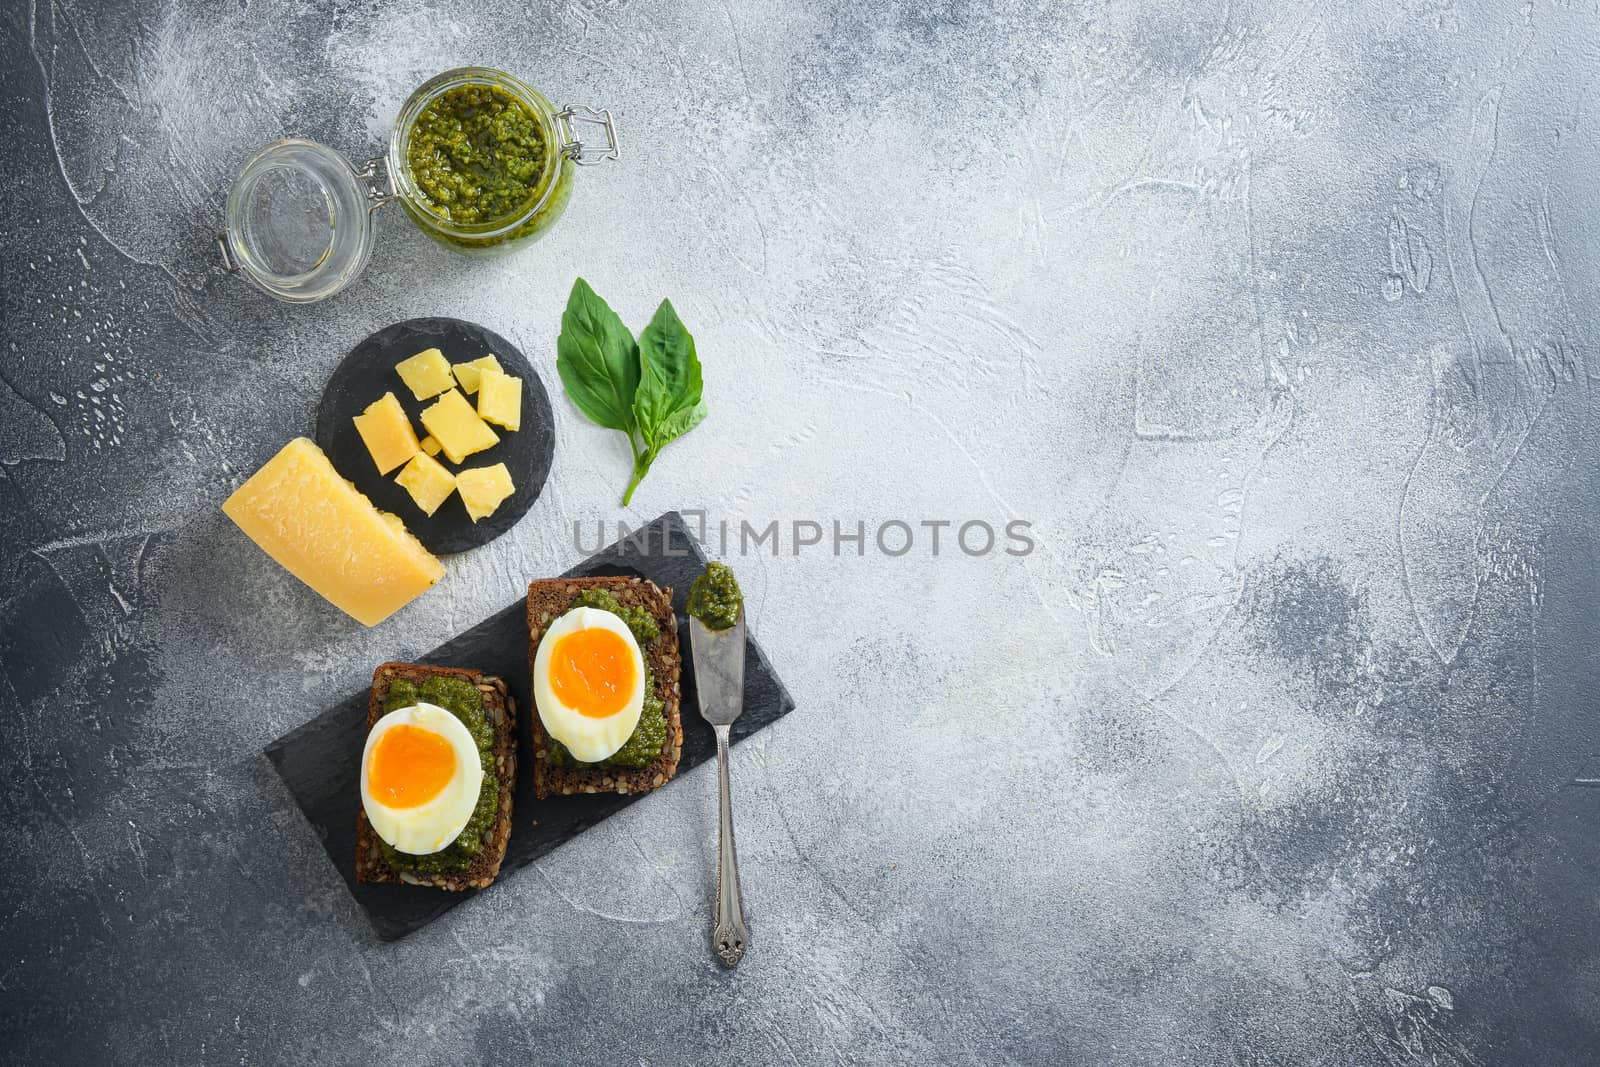 homemade eggs panini bread with Green basil pesto silver spoon on italian breakfast with ingredients green pesto on grey and white concrete table surface overhead top view space for text lay flat by Ilianesolenyi